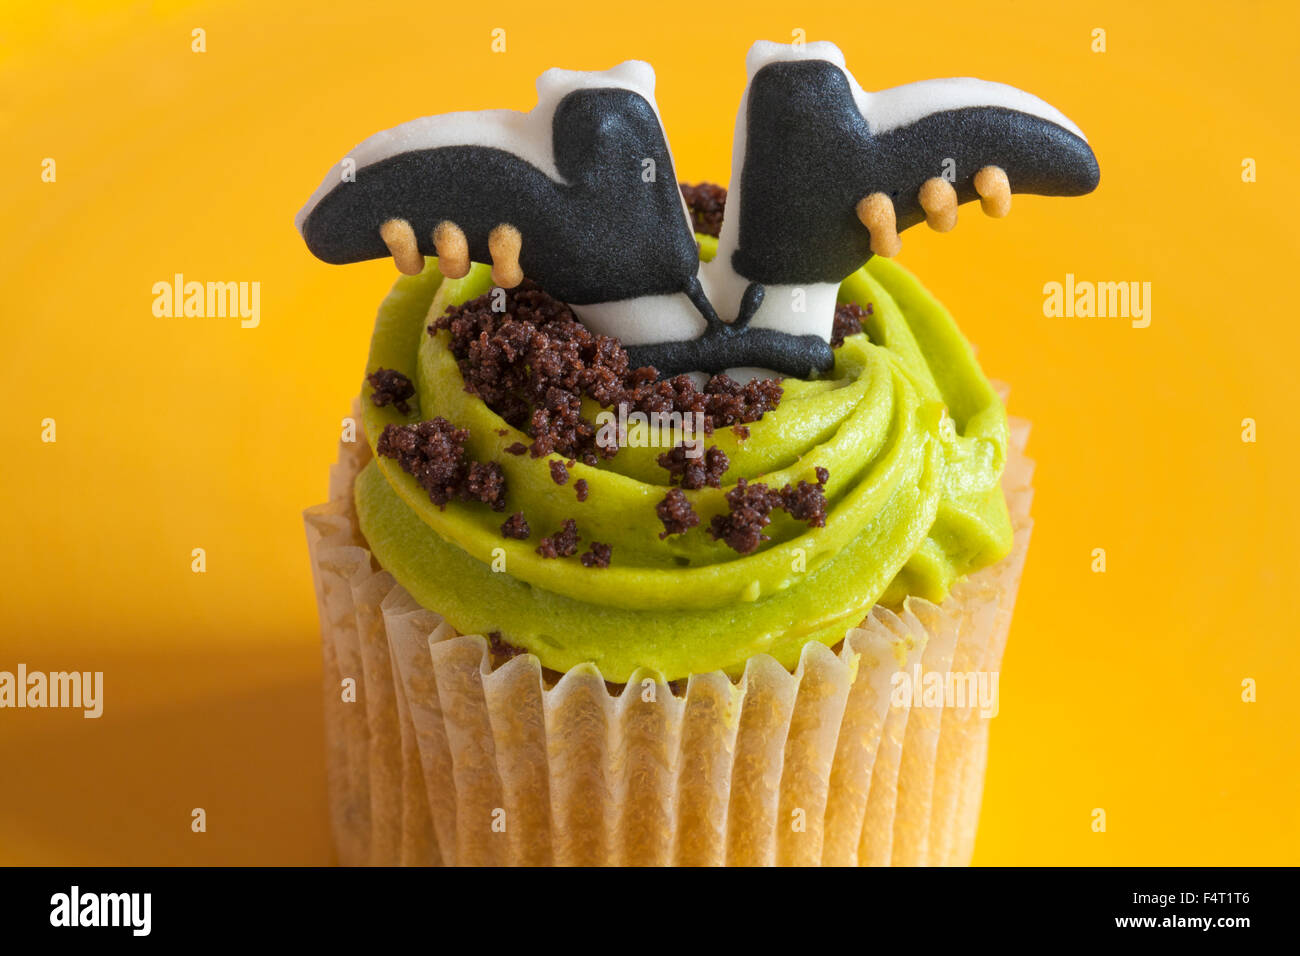 M&S Toffee Apple cupcake with witches feet for Halloween on yellow plate Stock Photo